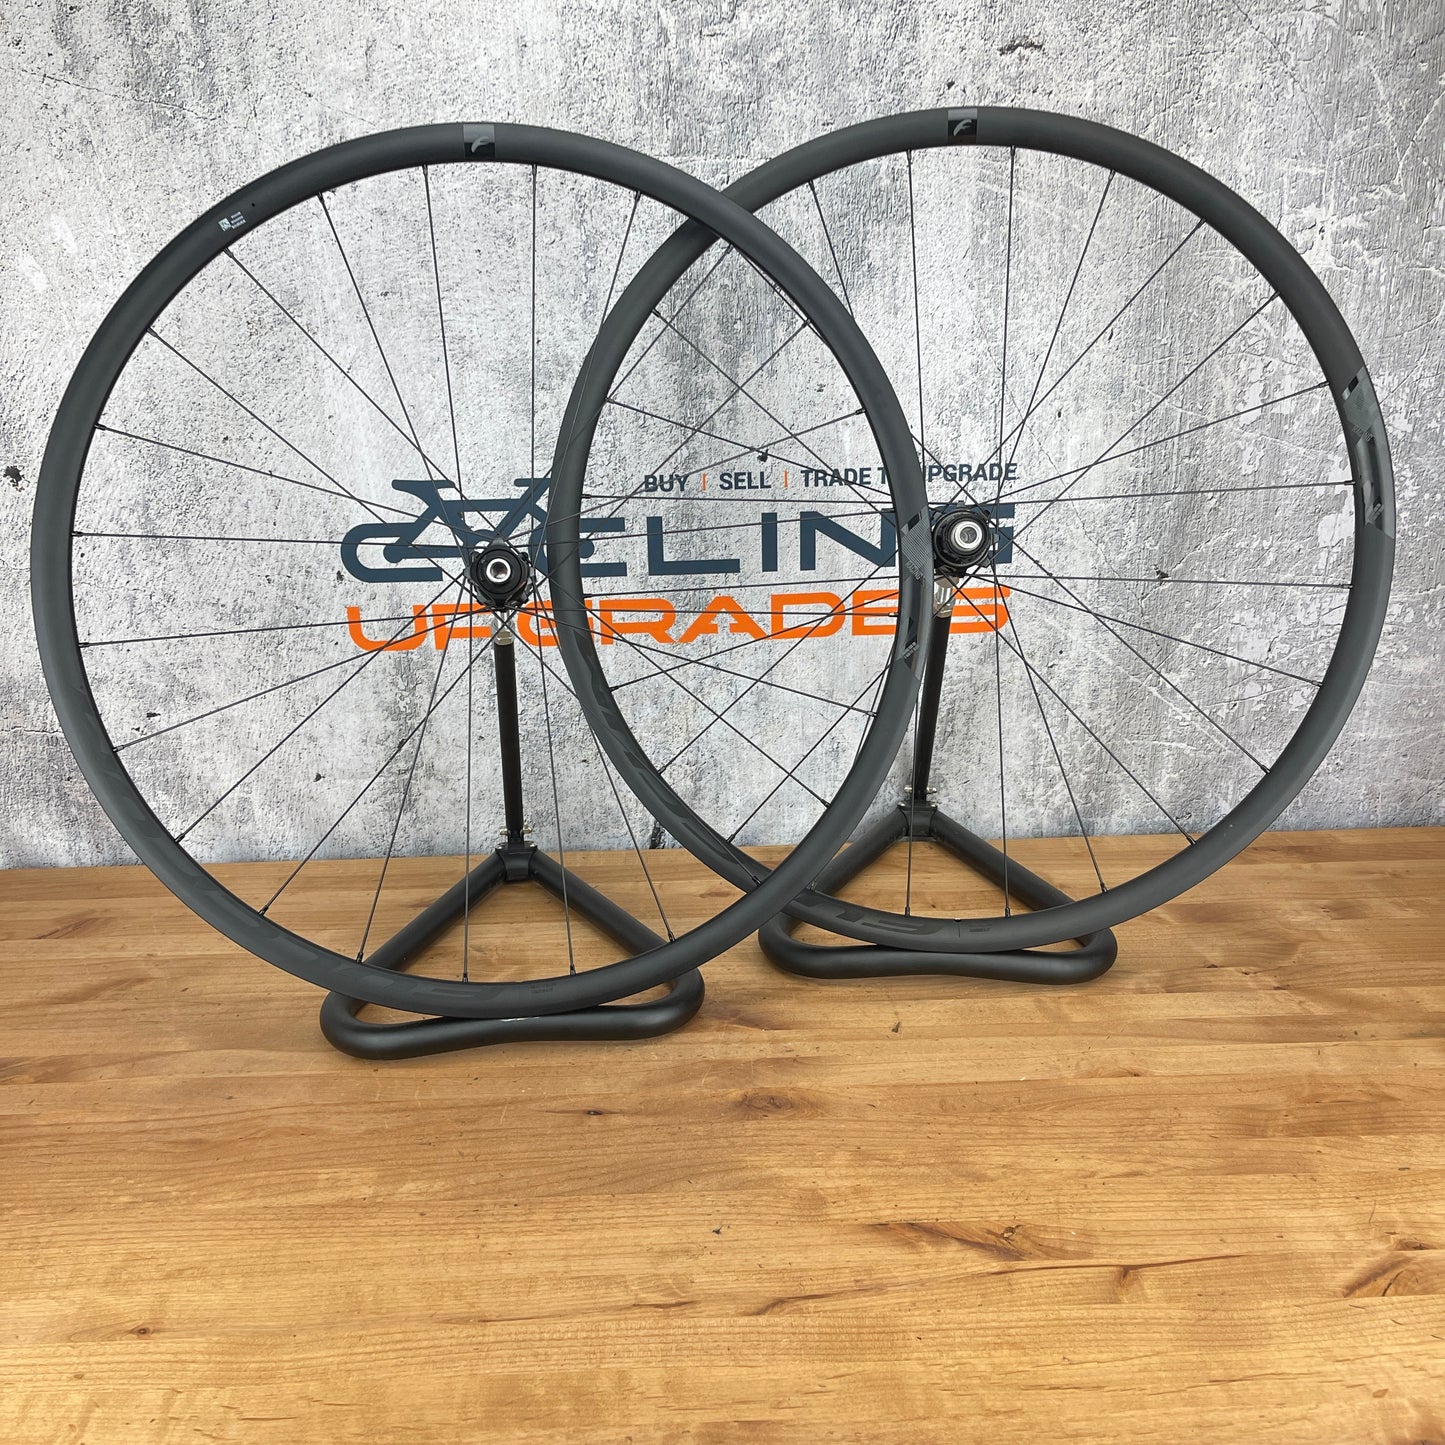 Low Mile! Fulcrum Racing 500 DB Alloy 2 Way Fit Carbon Tubeless Disc Wheelset 700c